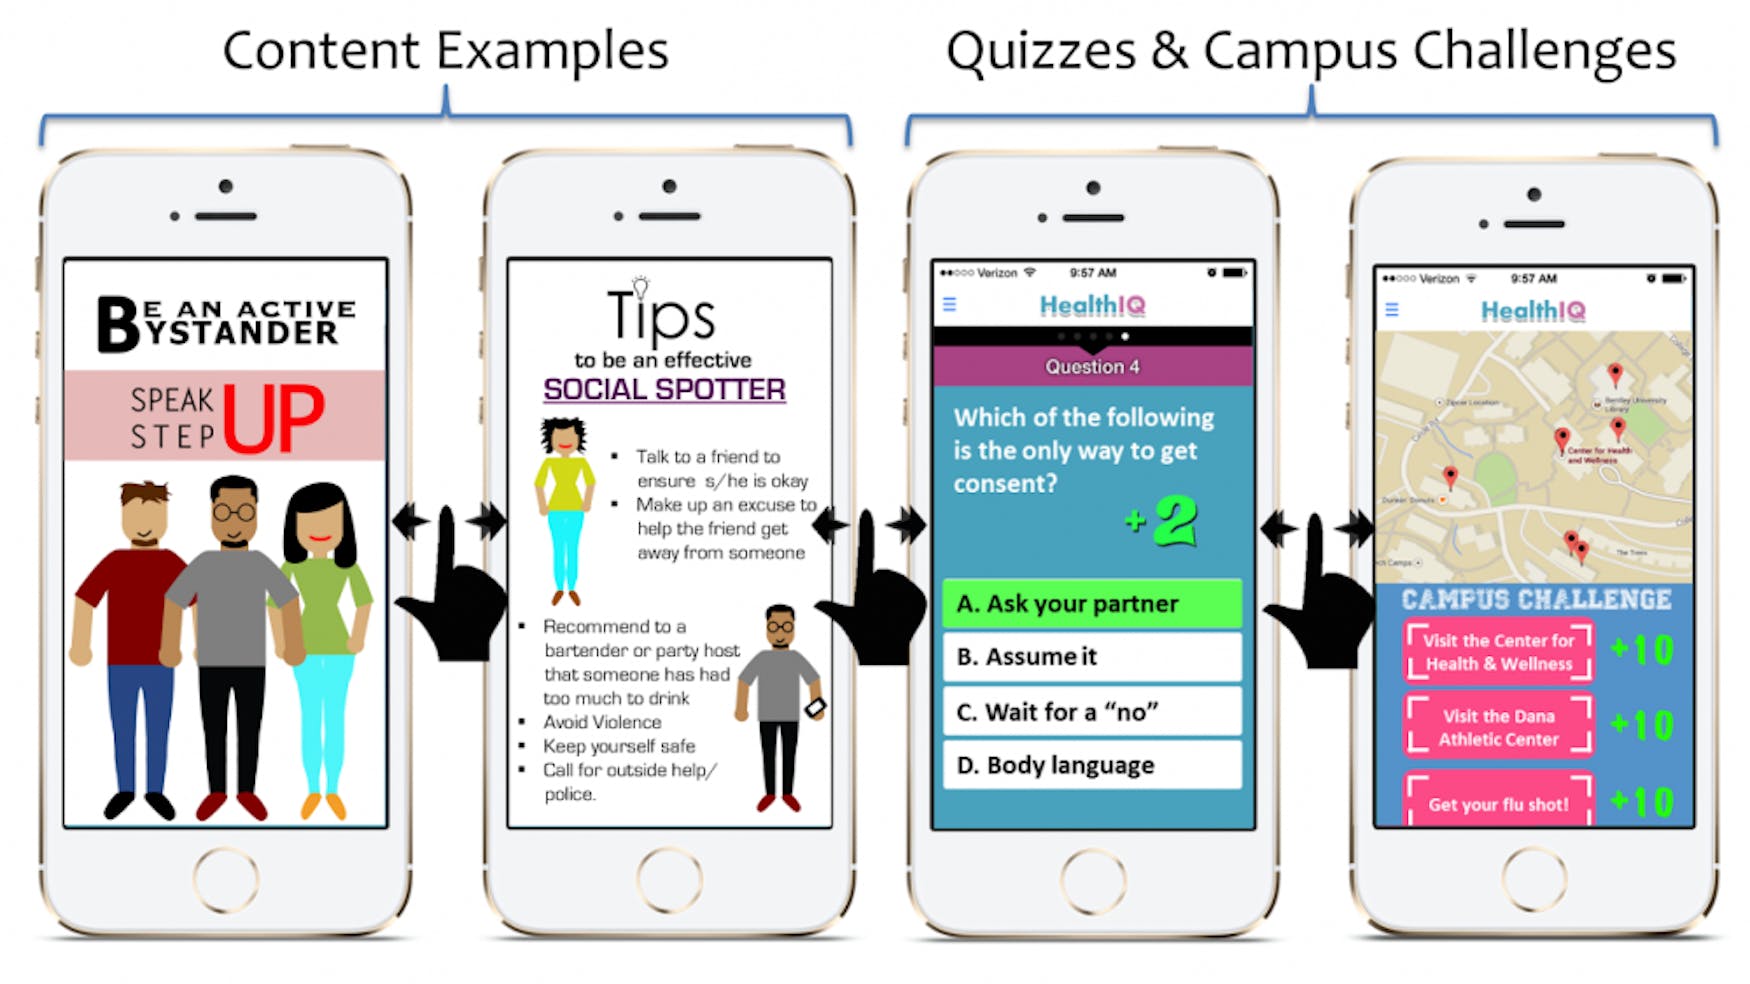 The HealthIQ mobile app utilizes the same psychology as the mobile app Candy Crush to motivate students to engage in health resources and education on their campuses.